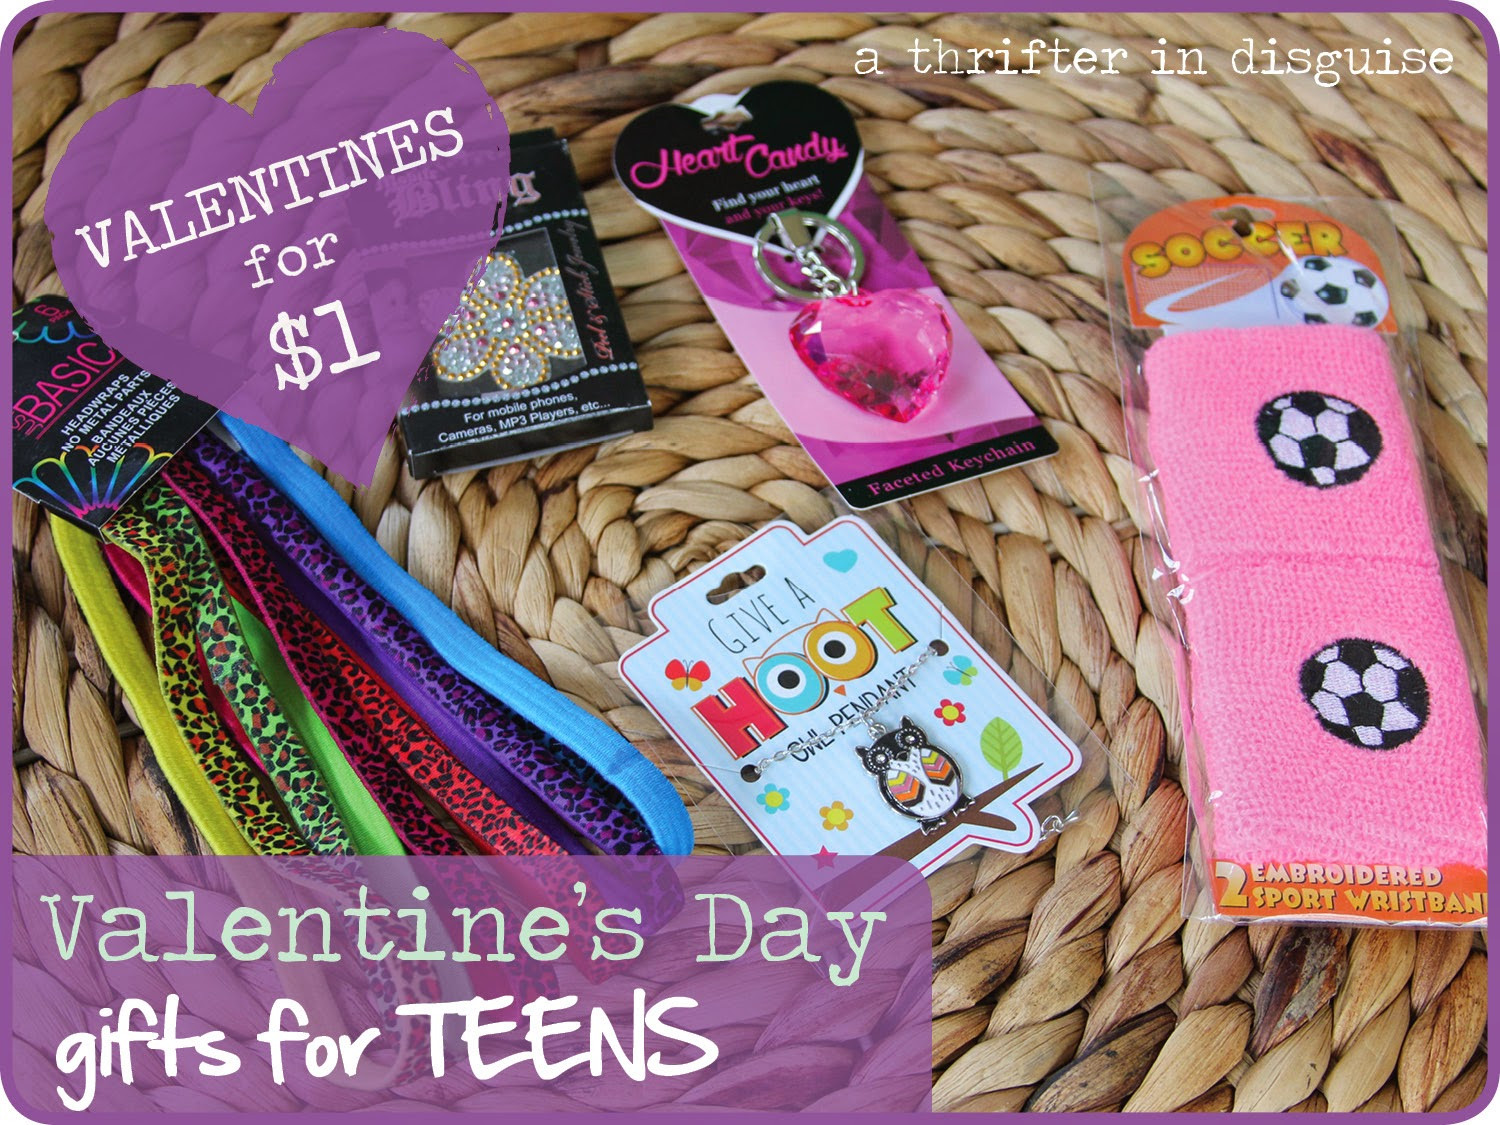 Valentine Gift Ideas For Teenage Girlfriend
 A Thrifter in Disguise More $1 Valentine s Day Gifts